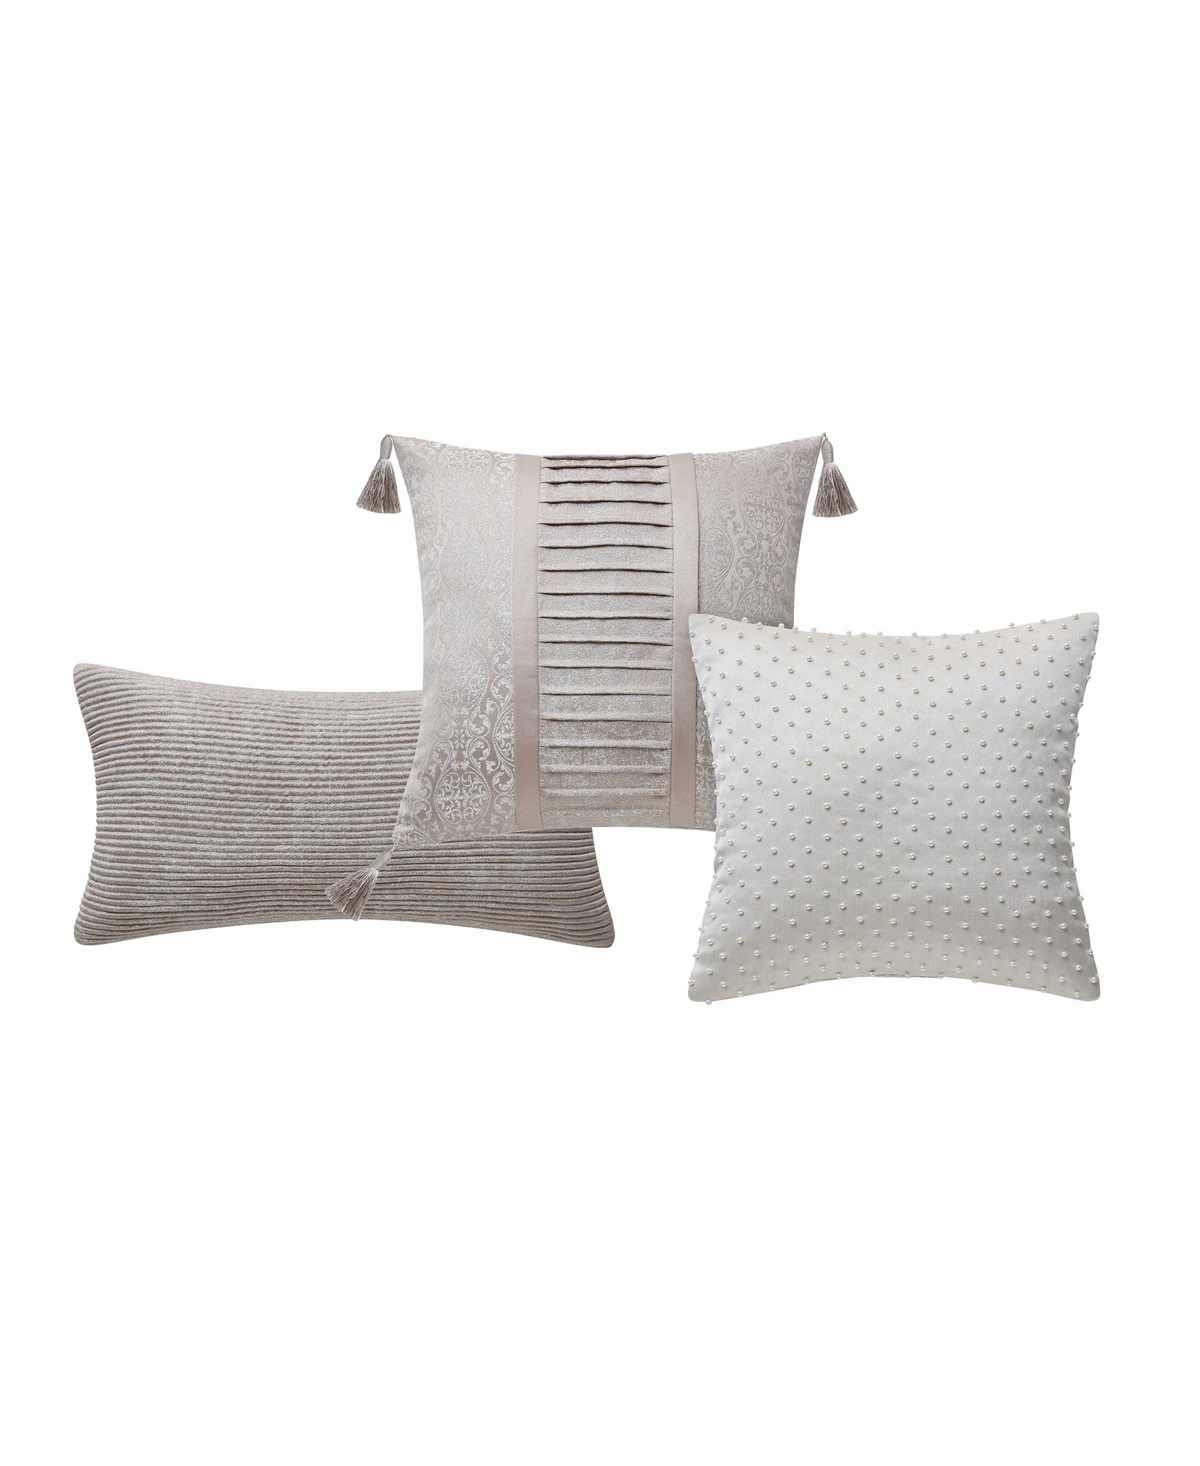 Waterford Cambrie Textured Reversible 3 Piece Decorative Pillow Set Bedding In Taupe